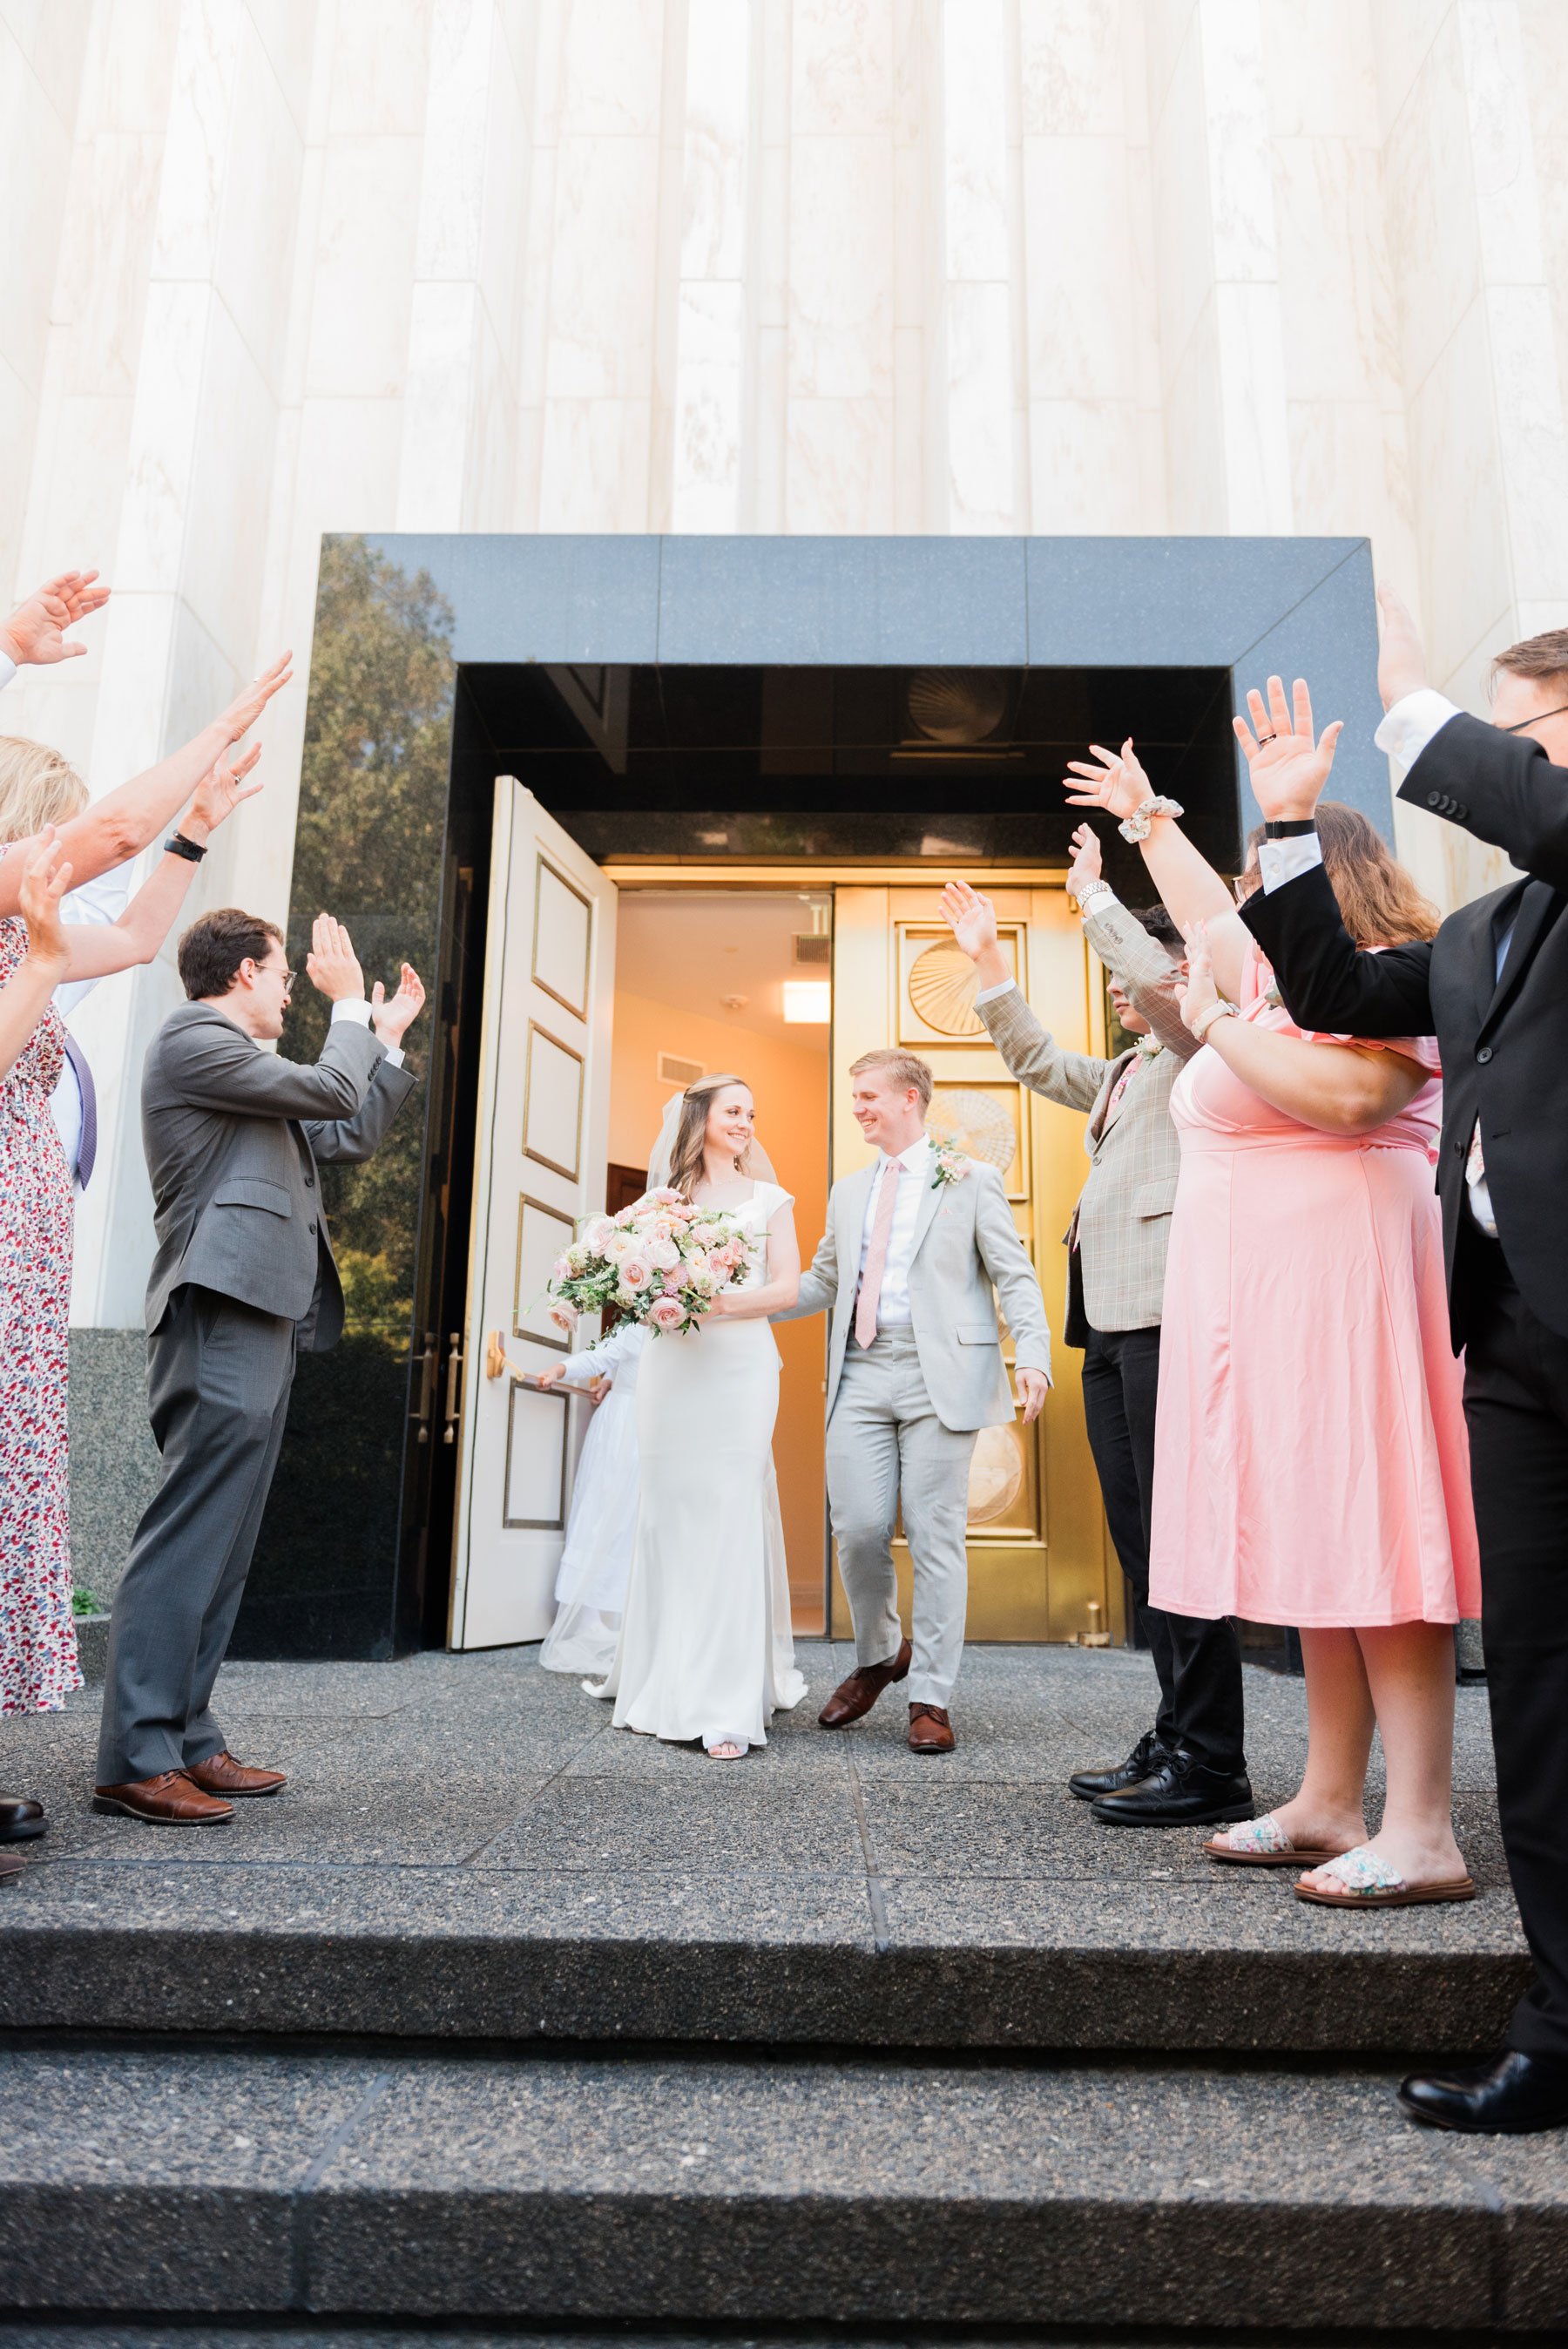    Family and friends cheer as the newly married couple exits the washington d.c. temple doors. #washingtondctemple #washingtondcweddingphotographer #dcwedding #pinkwedding #ldsweddingphotographer #pinkweddingbouquet #washingtondctempleexit #eastcoas